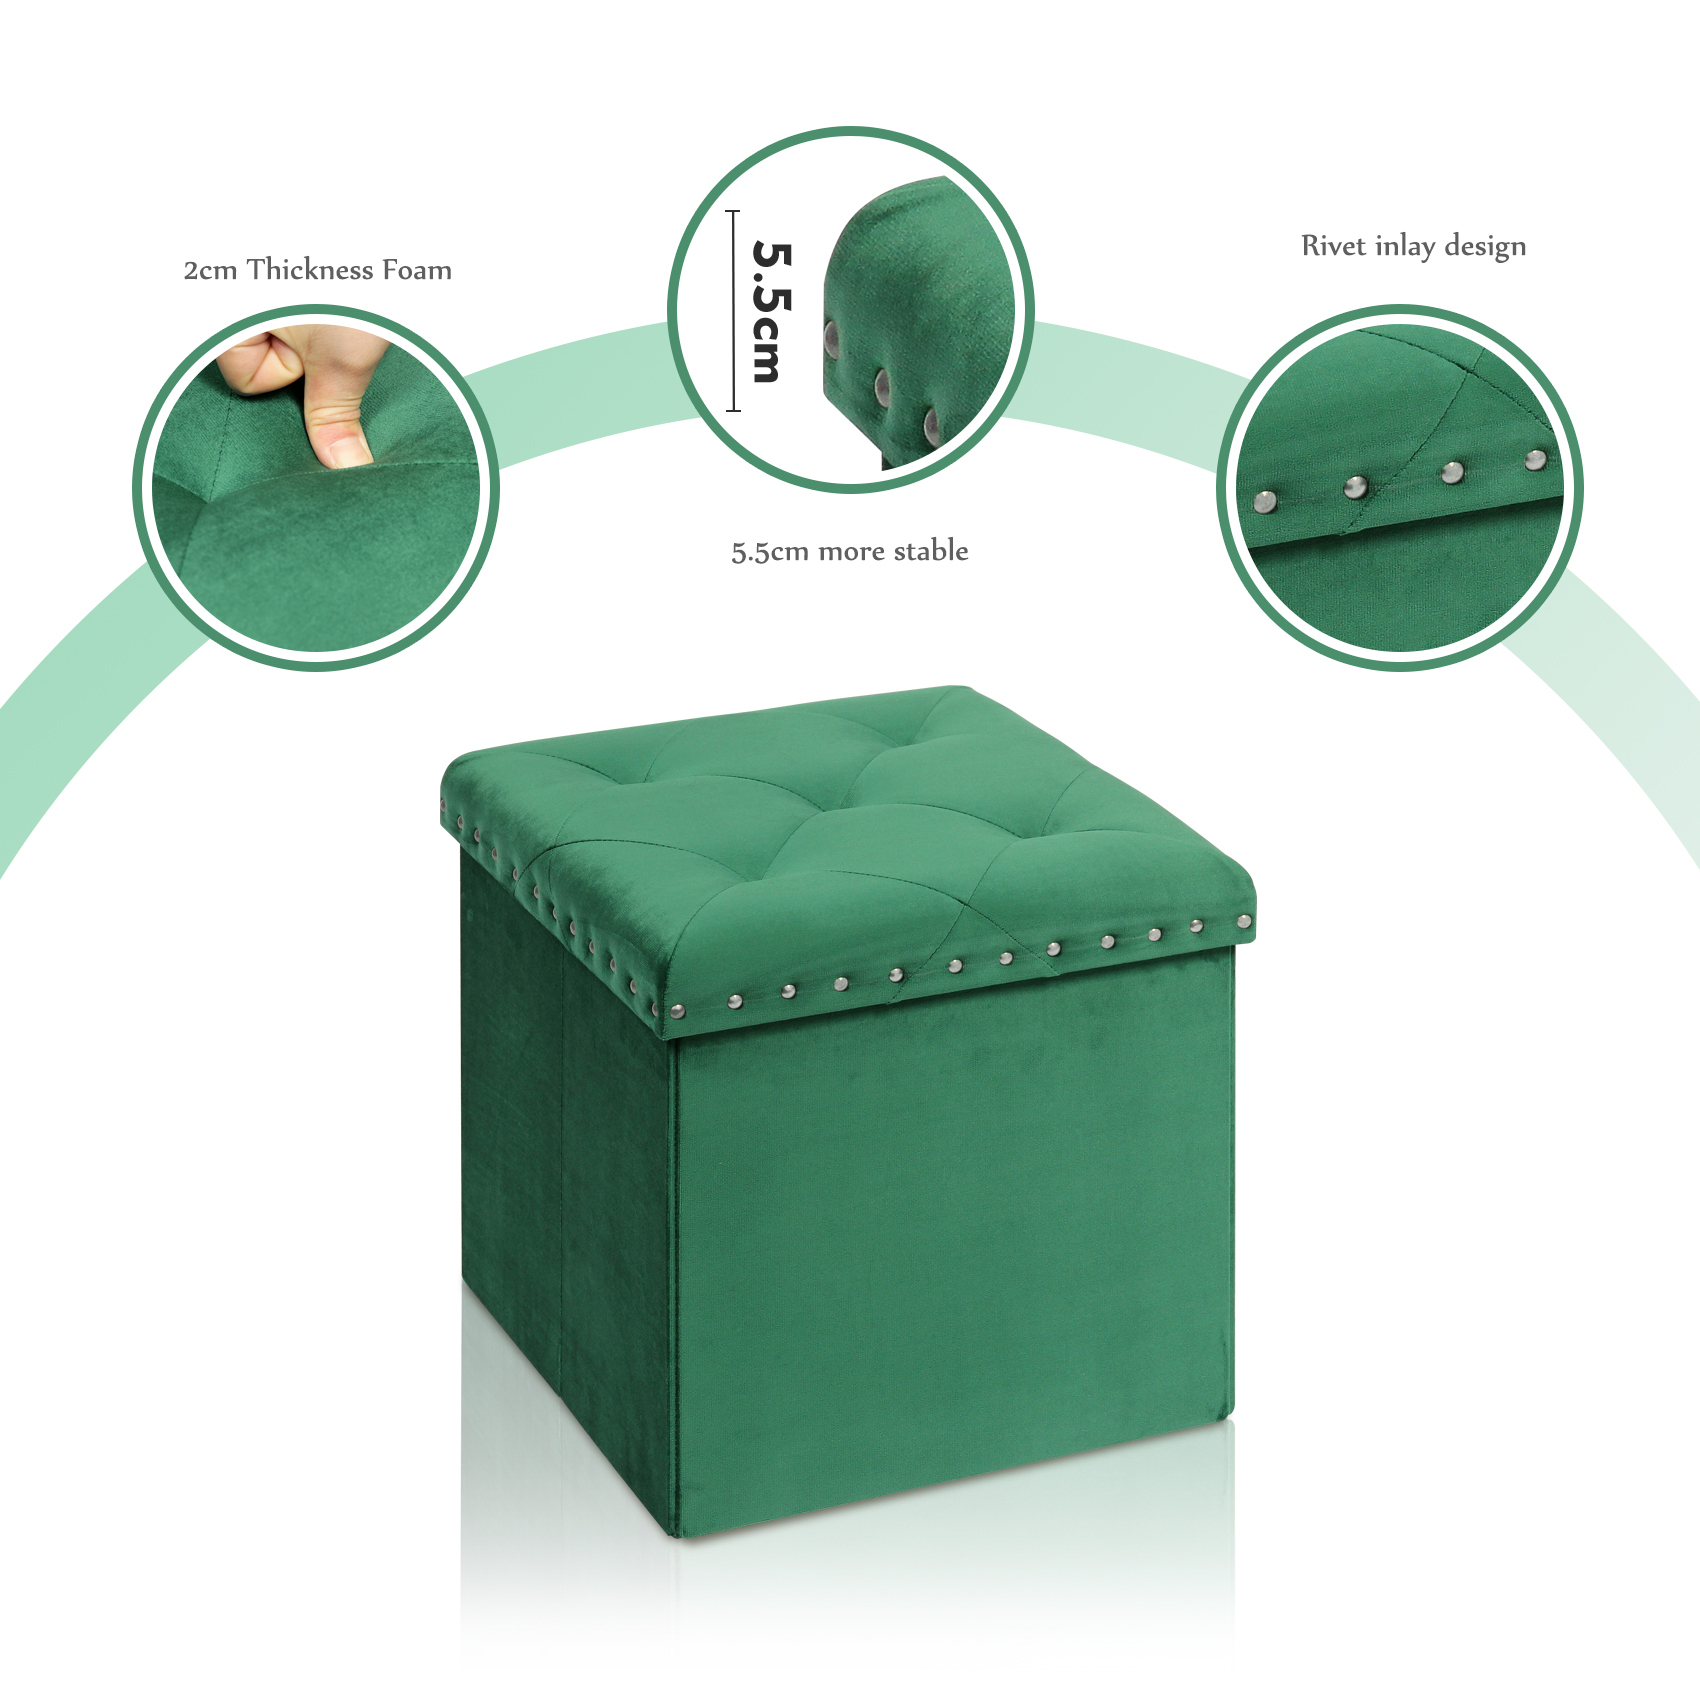 PINPLUS 15.7" Green Velvet Folding Storage Ottoman Cube, Small Foot Rest Stool, Window Seat for Living Room, Toy Chest Box with Rivet Tray - image 3 of 5